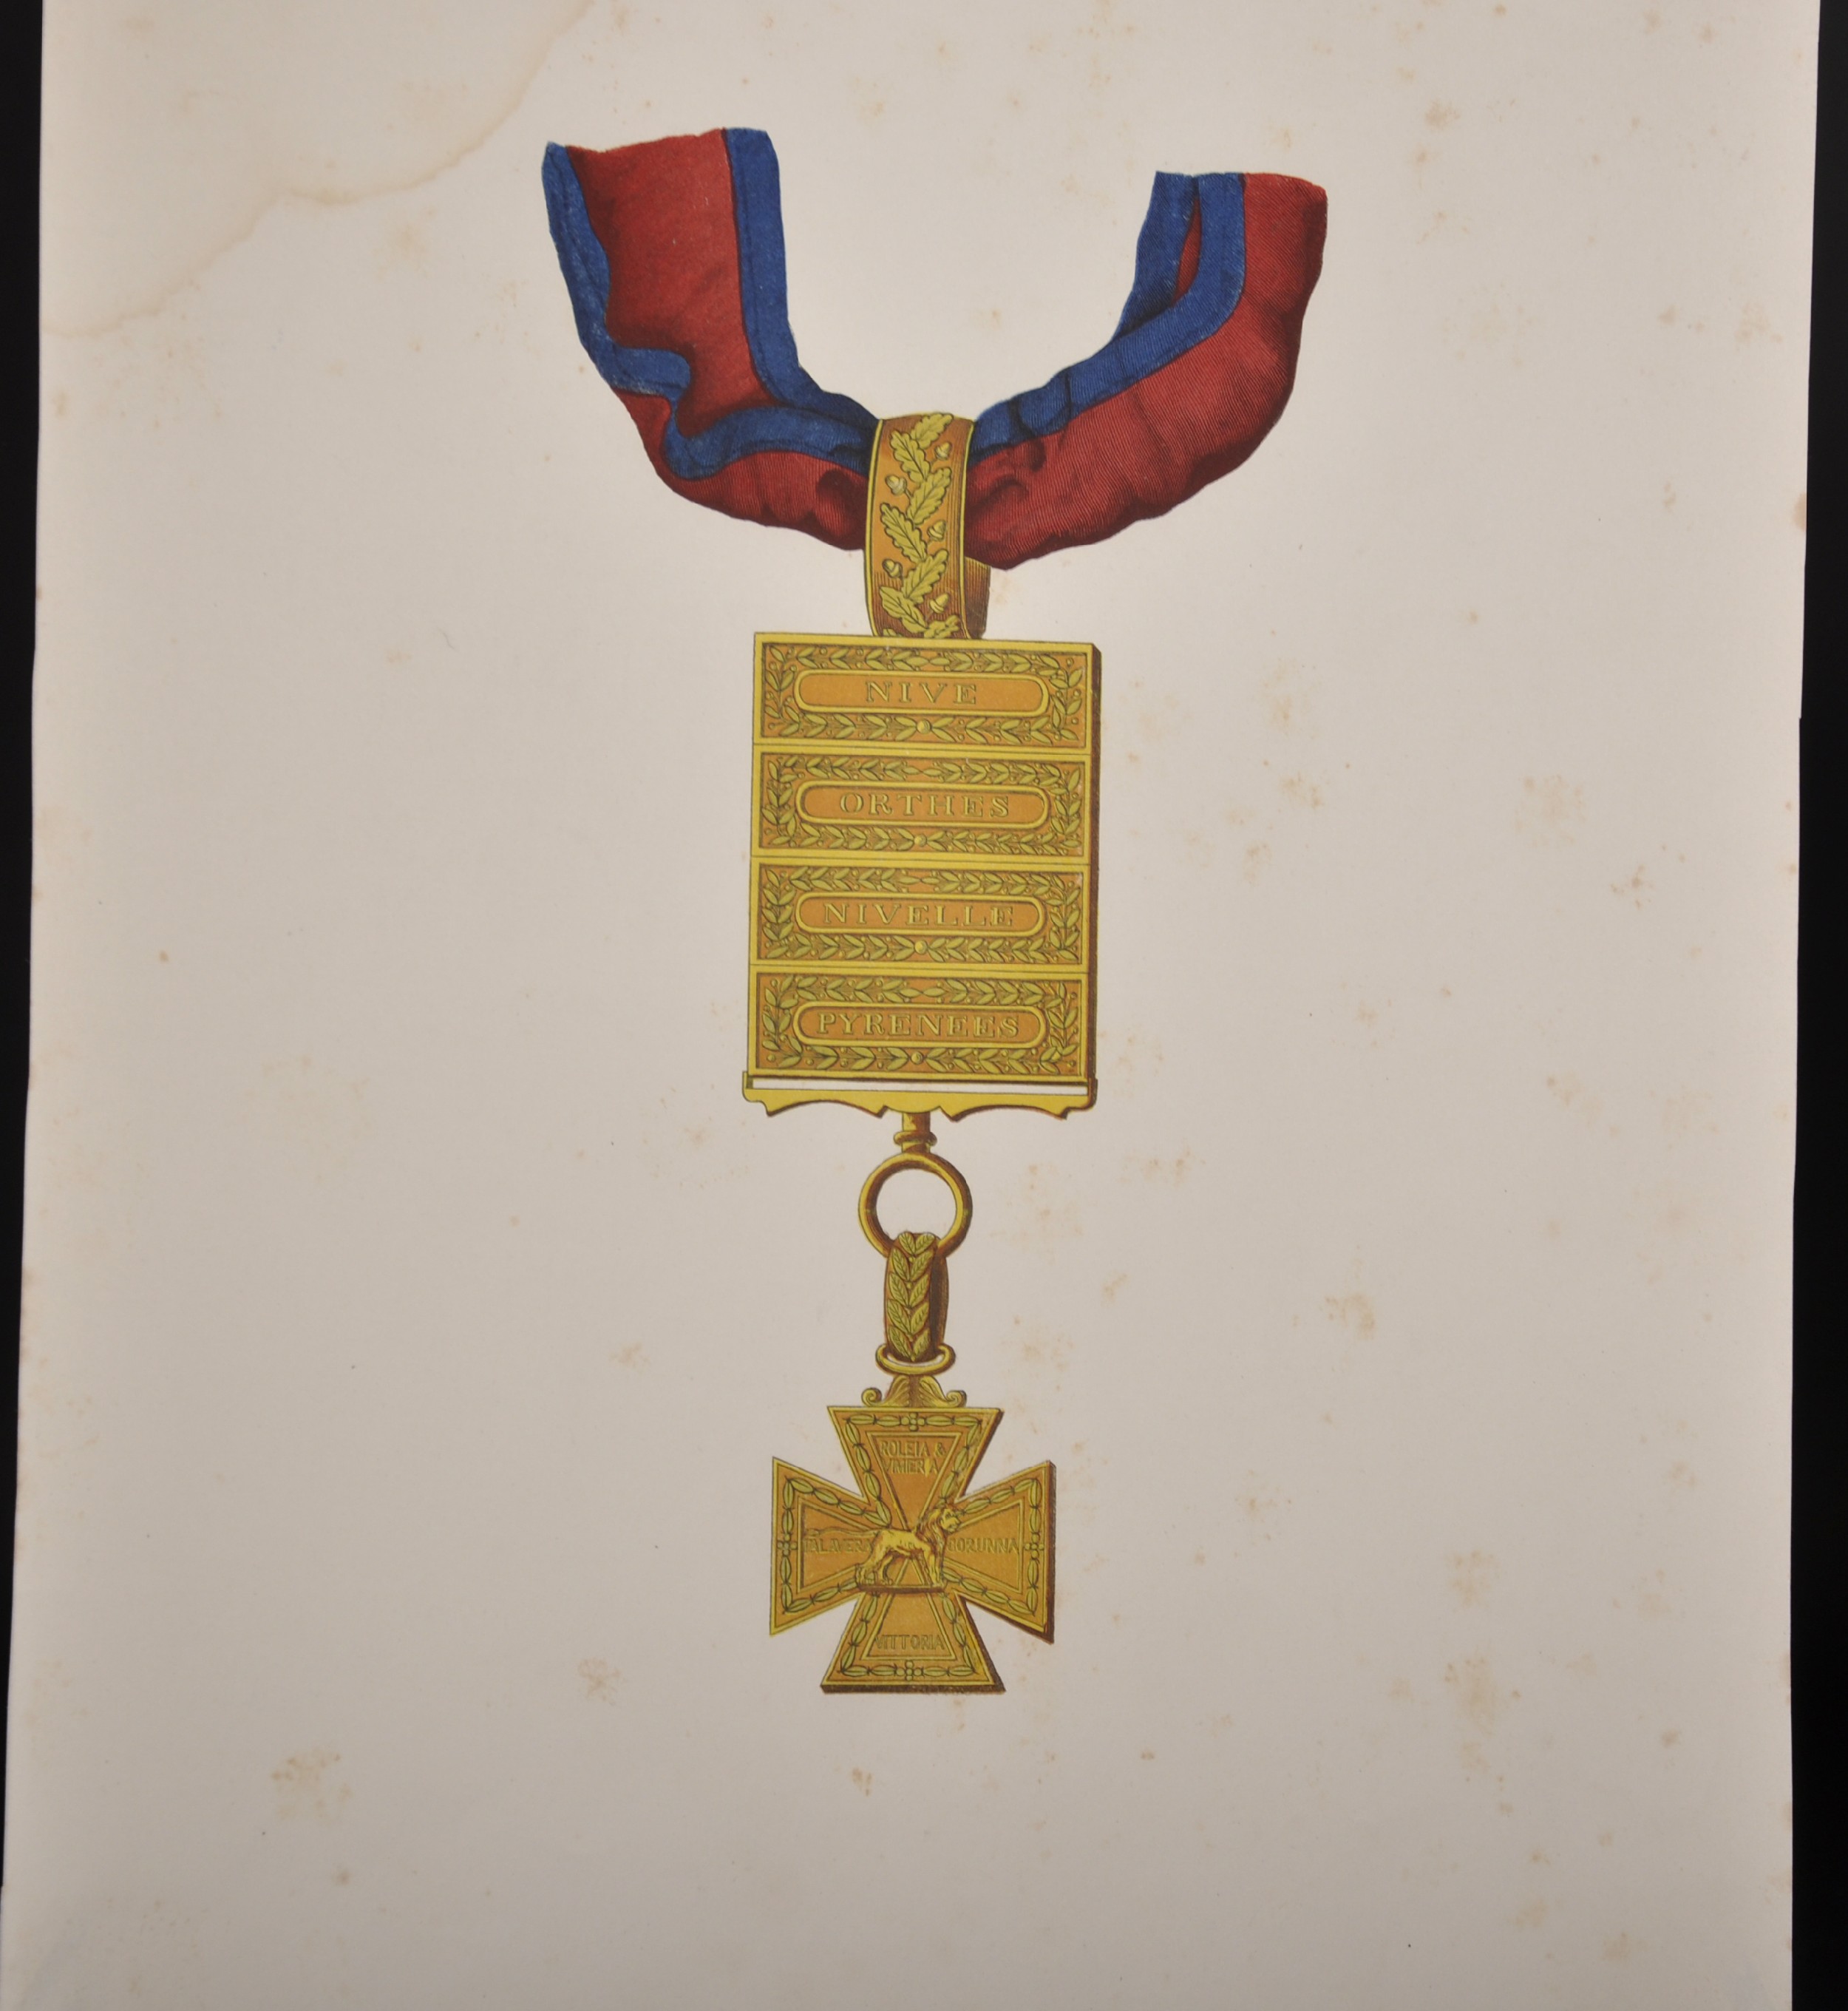 20th Century English School. "Badge & Ribboned - Order of the Thistle", Print, Inscribed on the - Image 3 of 4